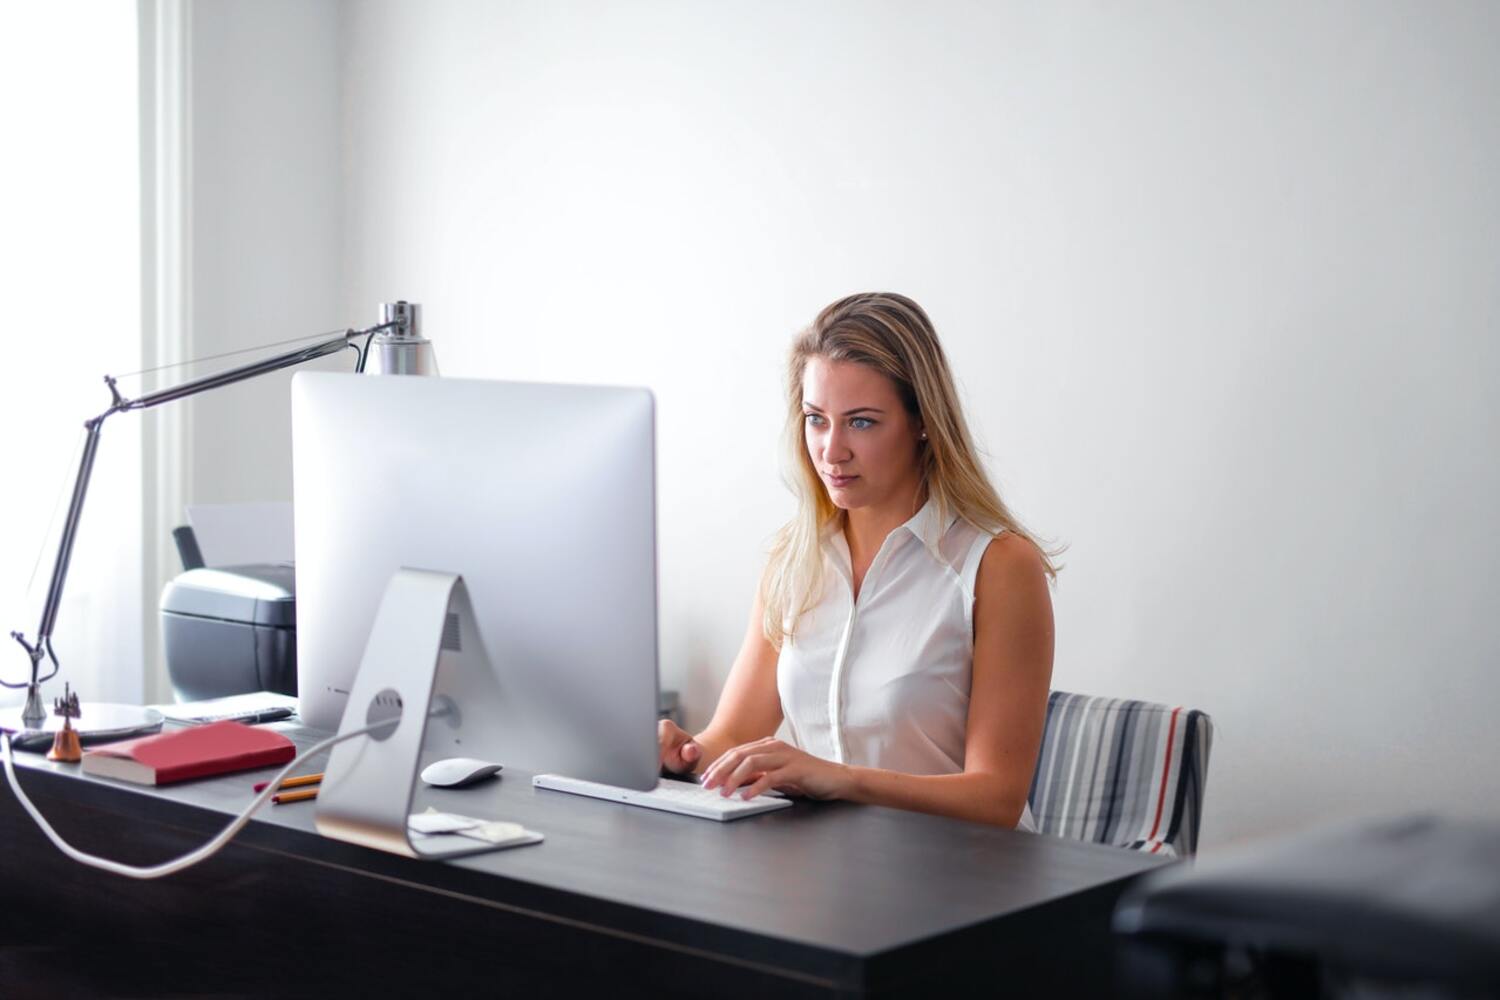 A women at her computer working on email marketing.